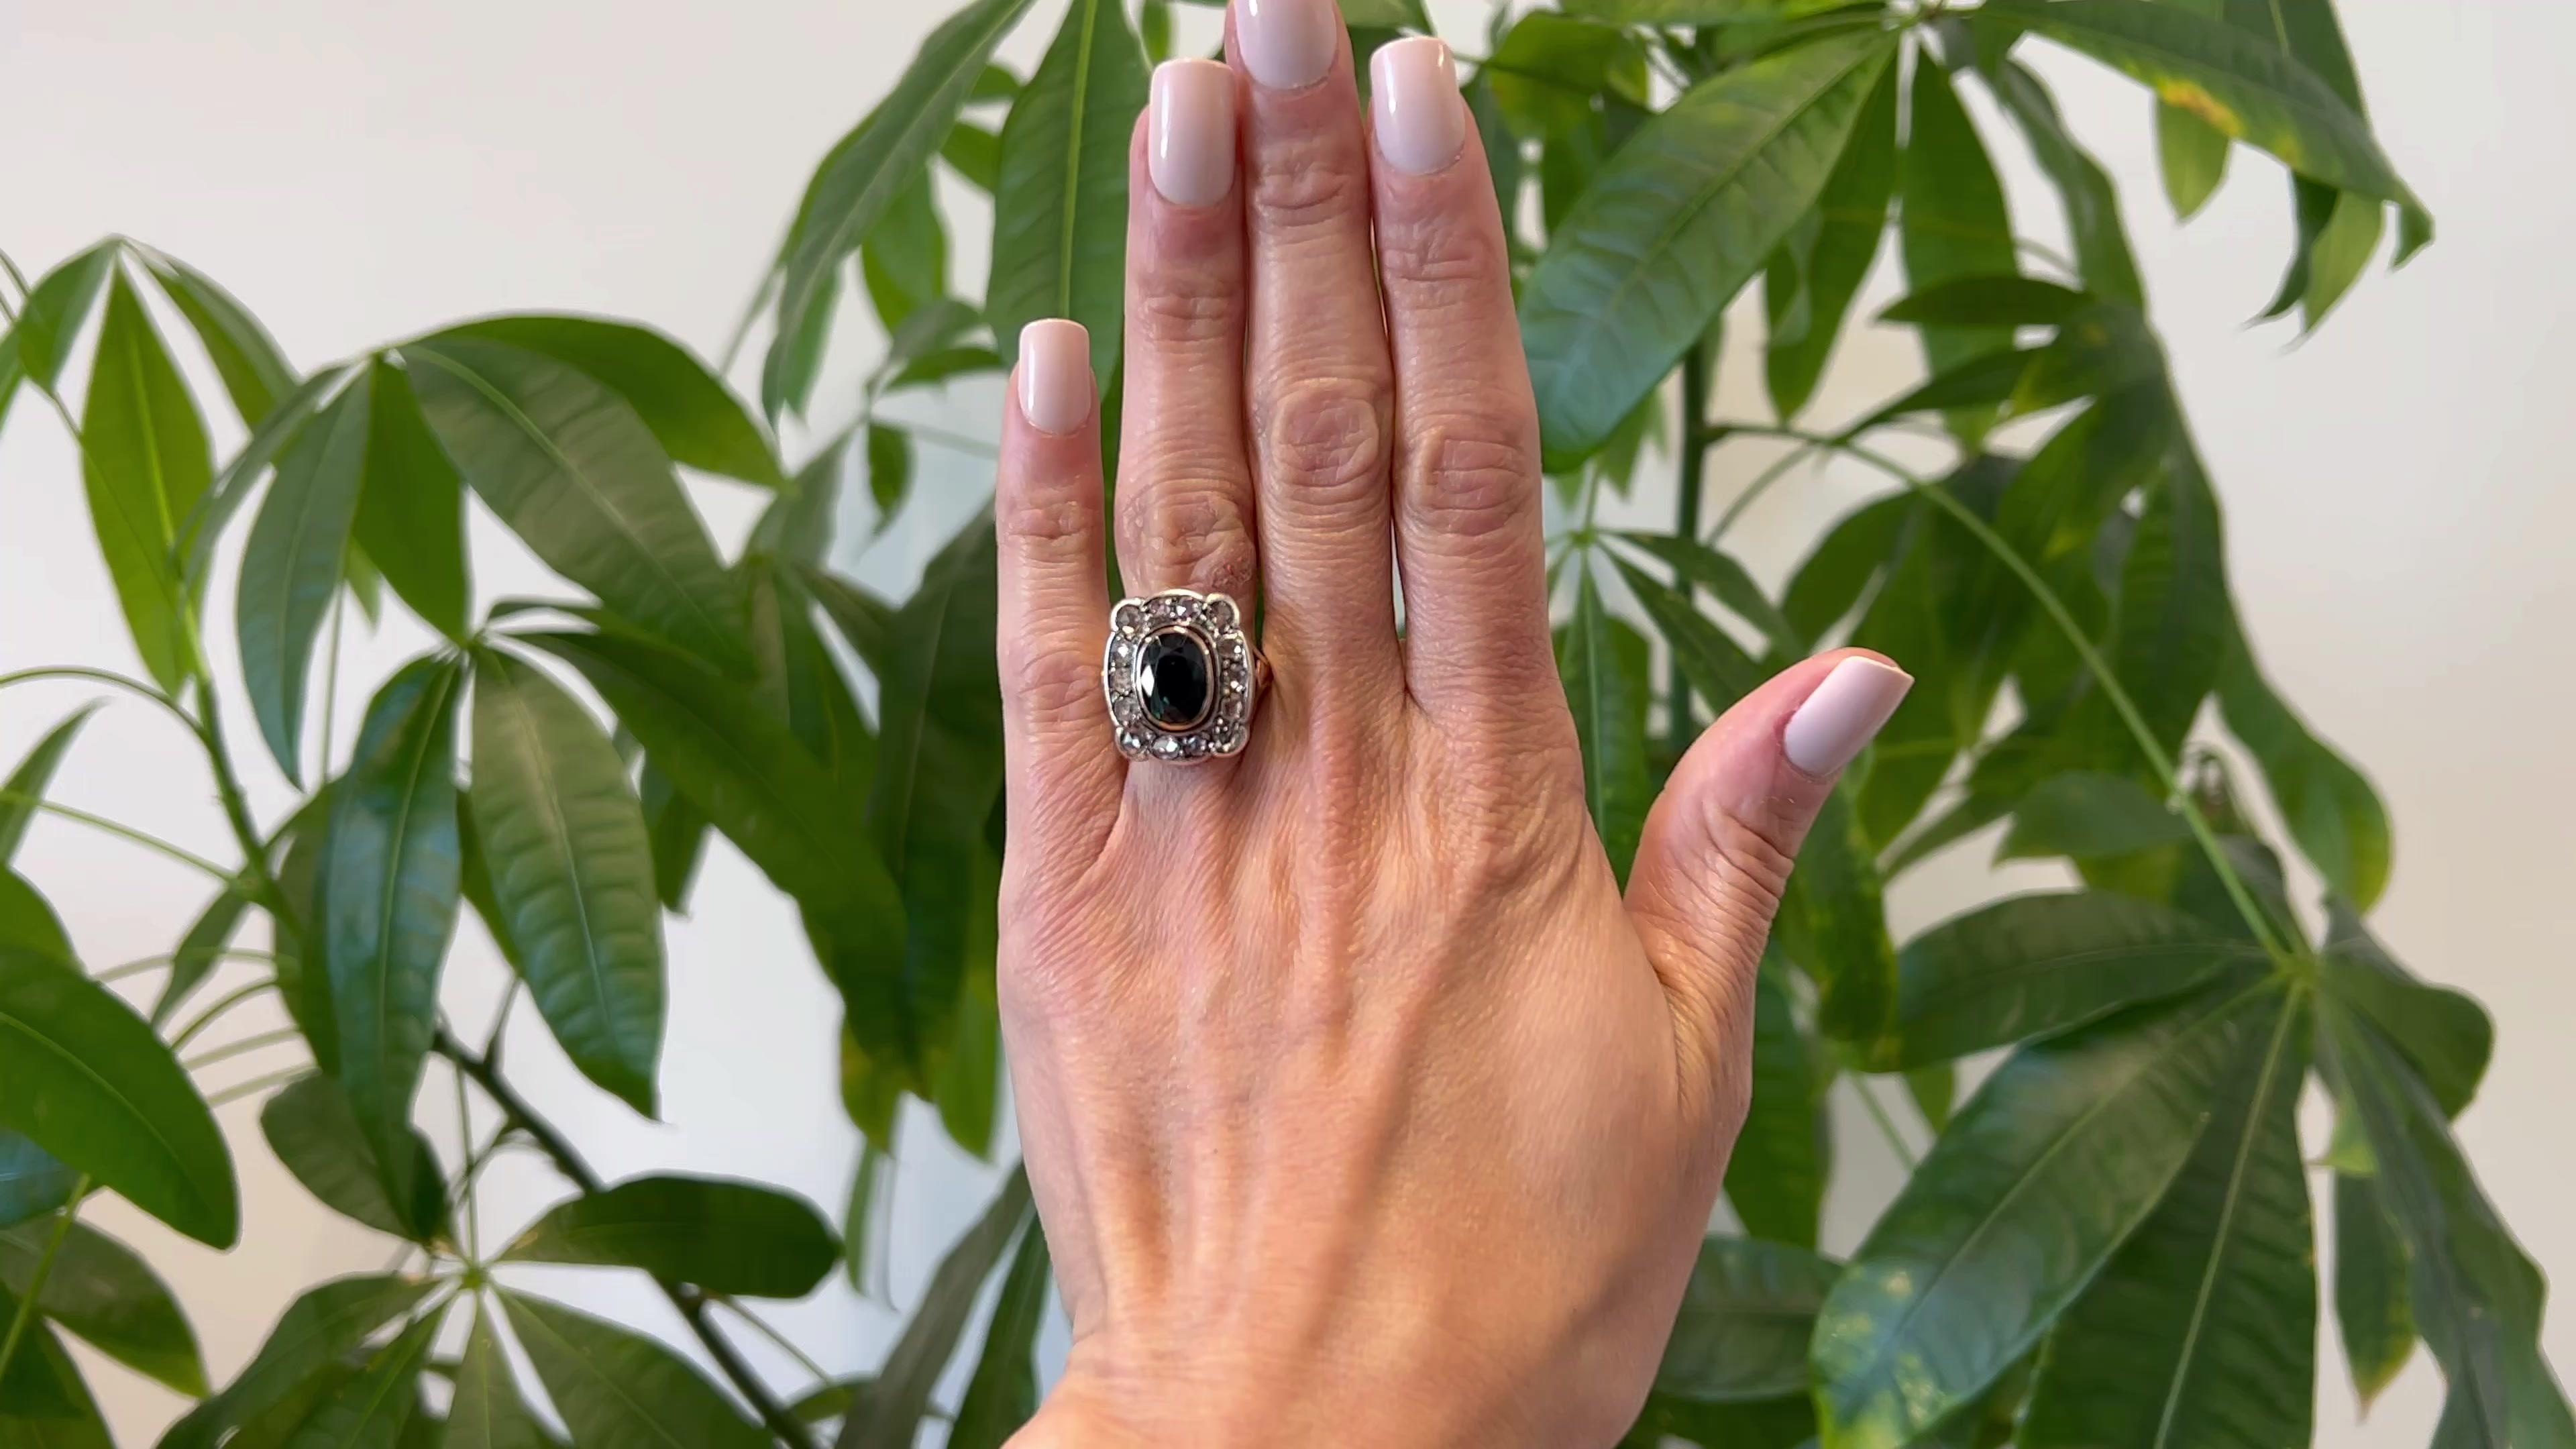 One Victorian GIA Australian No Heat Sapphire and Diamond Silver 18k Gold Cluster Ring. Featuring one GIA oval mixed cut dark greenish blue sapphire weighing approximately 3.75 carats, accompanied with GIA #2231054512 stating the sapphire is of